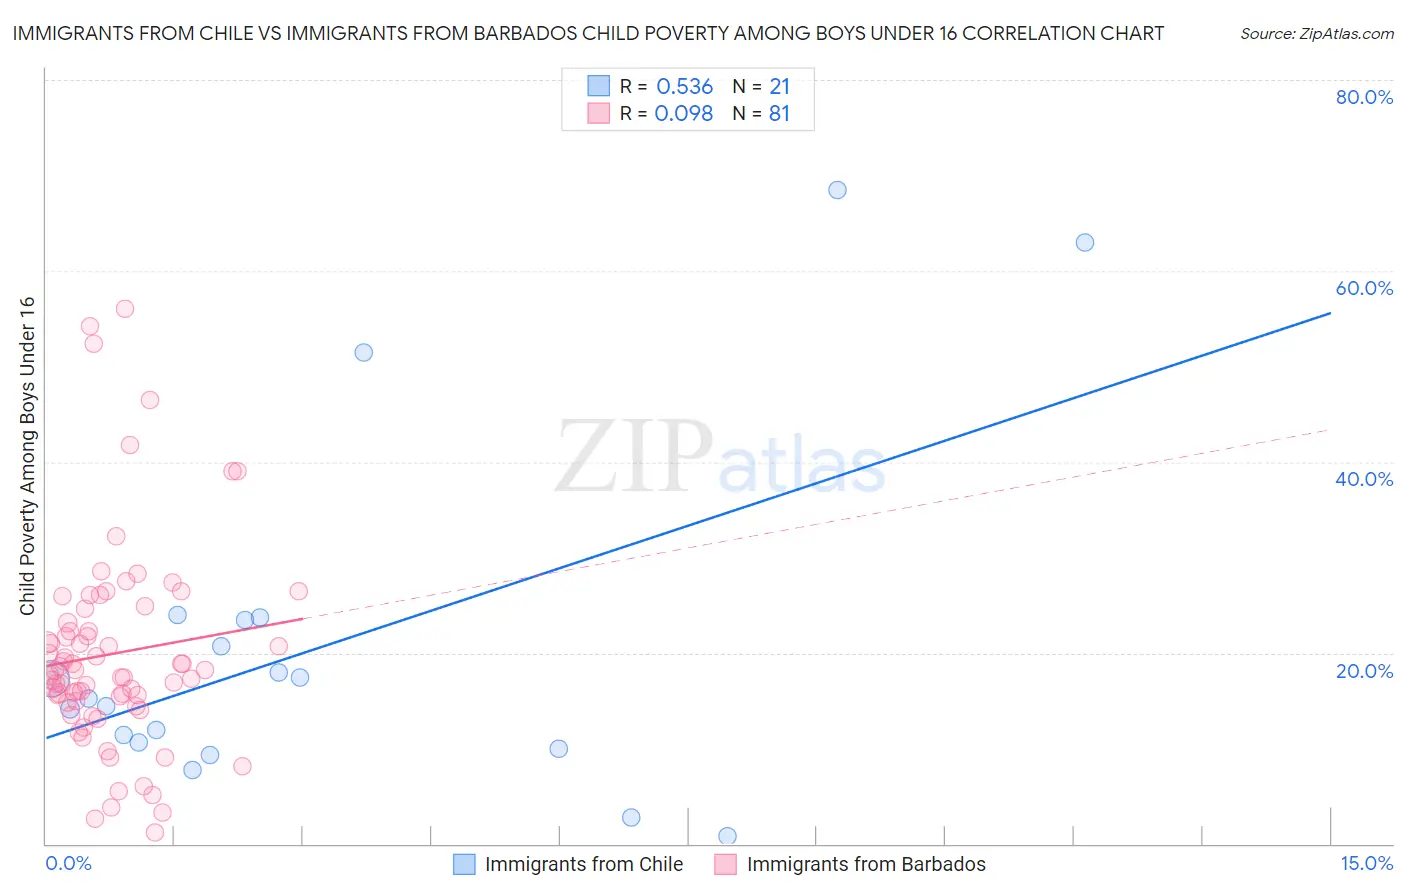 Immigrants from Chile vs Immigrants from Barbados Child Poverty Among Boys Under 16